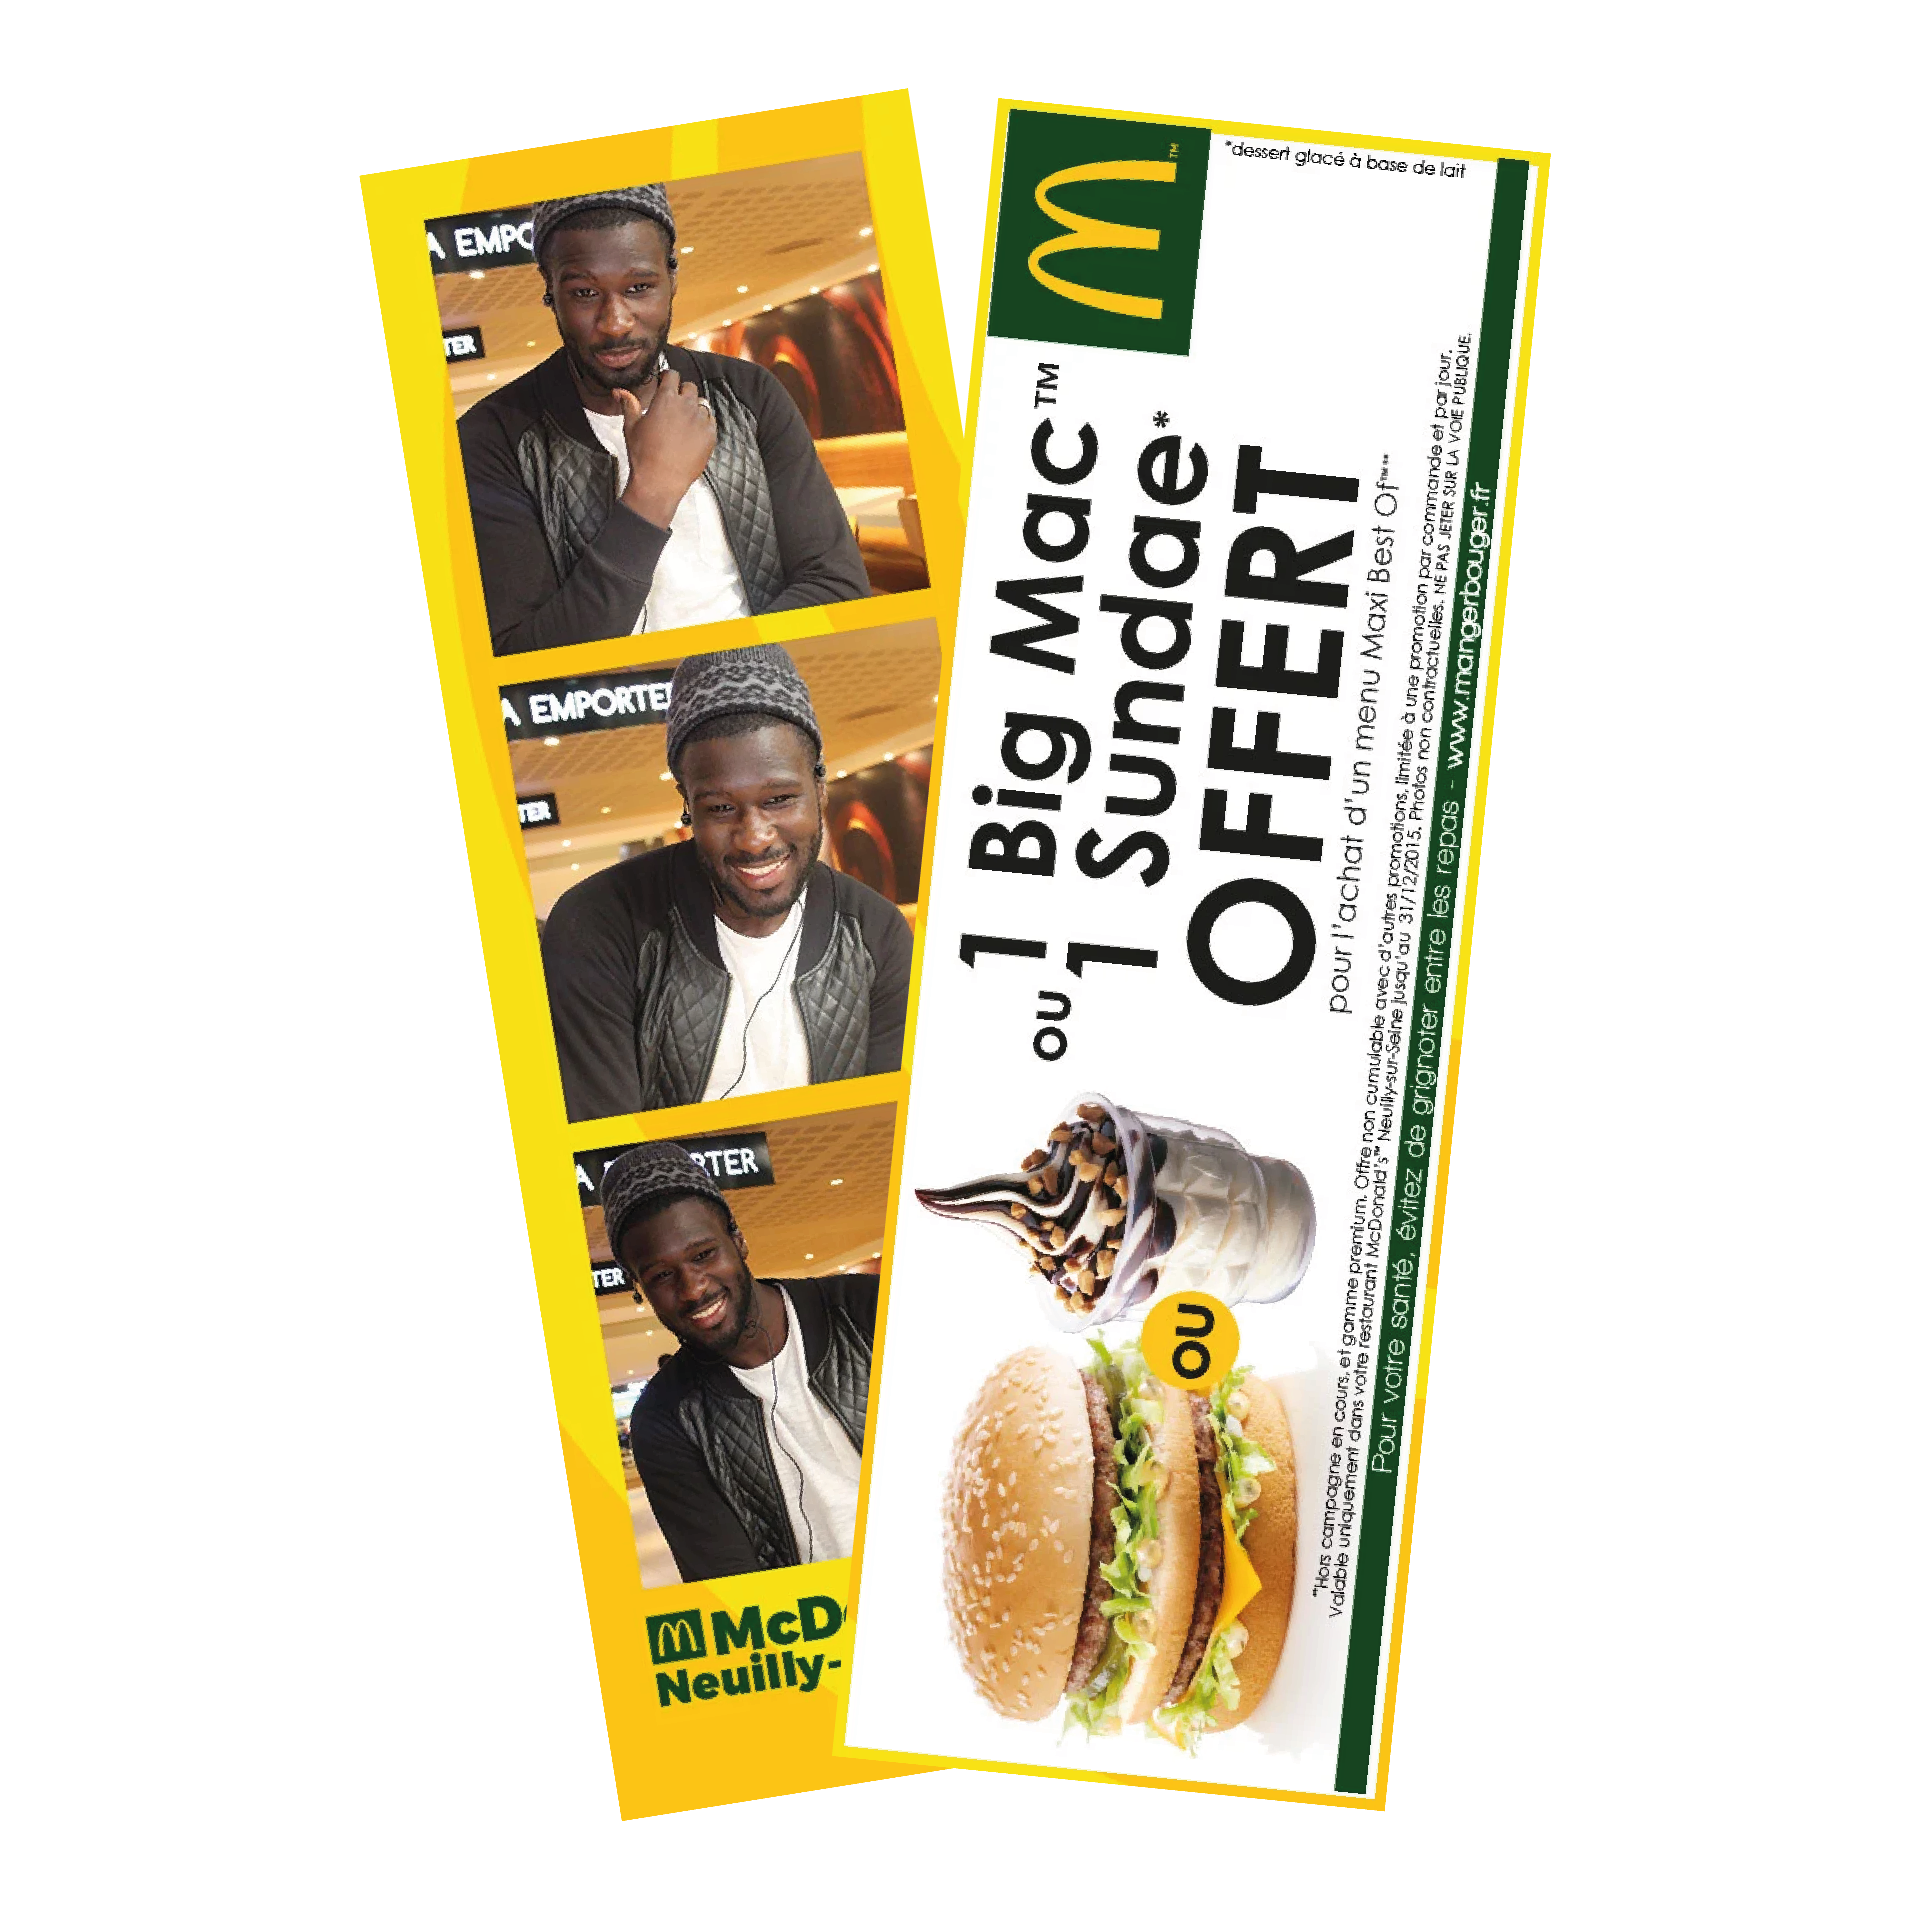 Celebrity Style Photobooth Discounts - Grab a free Big Mac or Sundae with our special edition photobooth coupons. #McDDeals #StarStuddedSavings